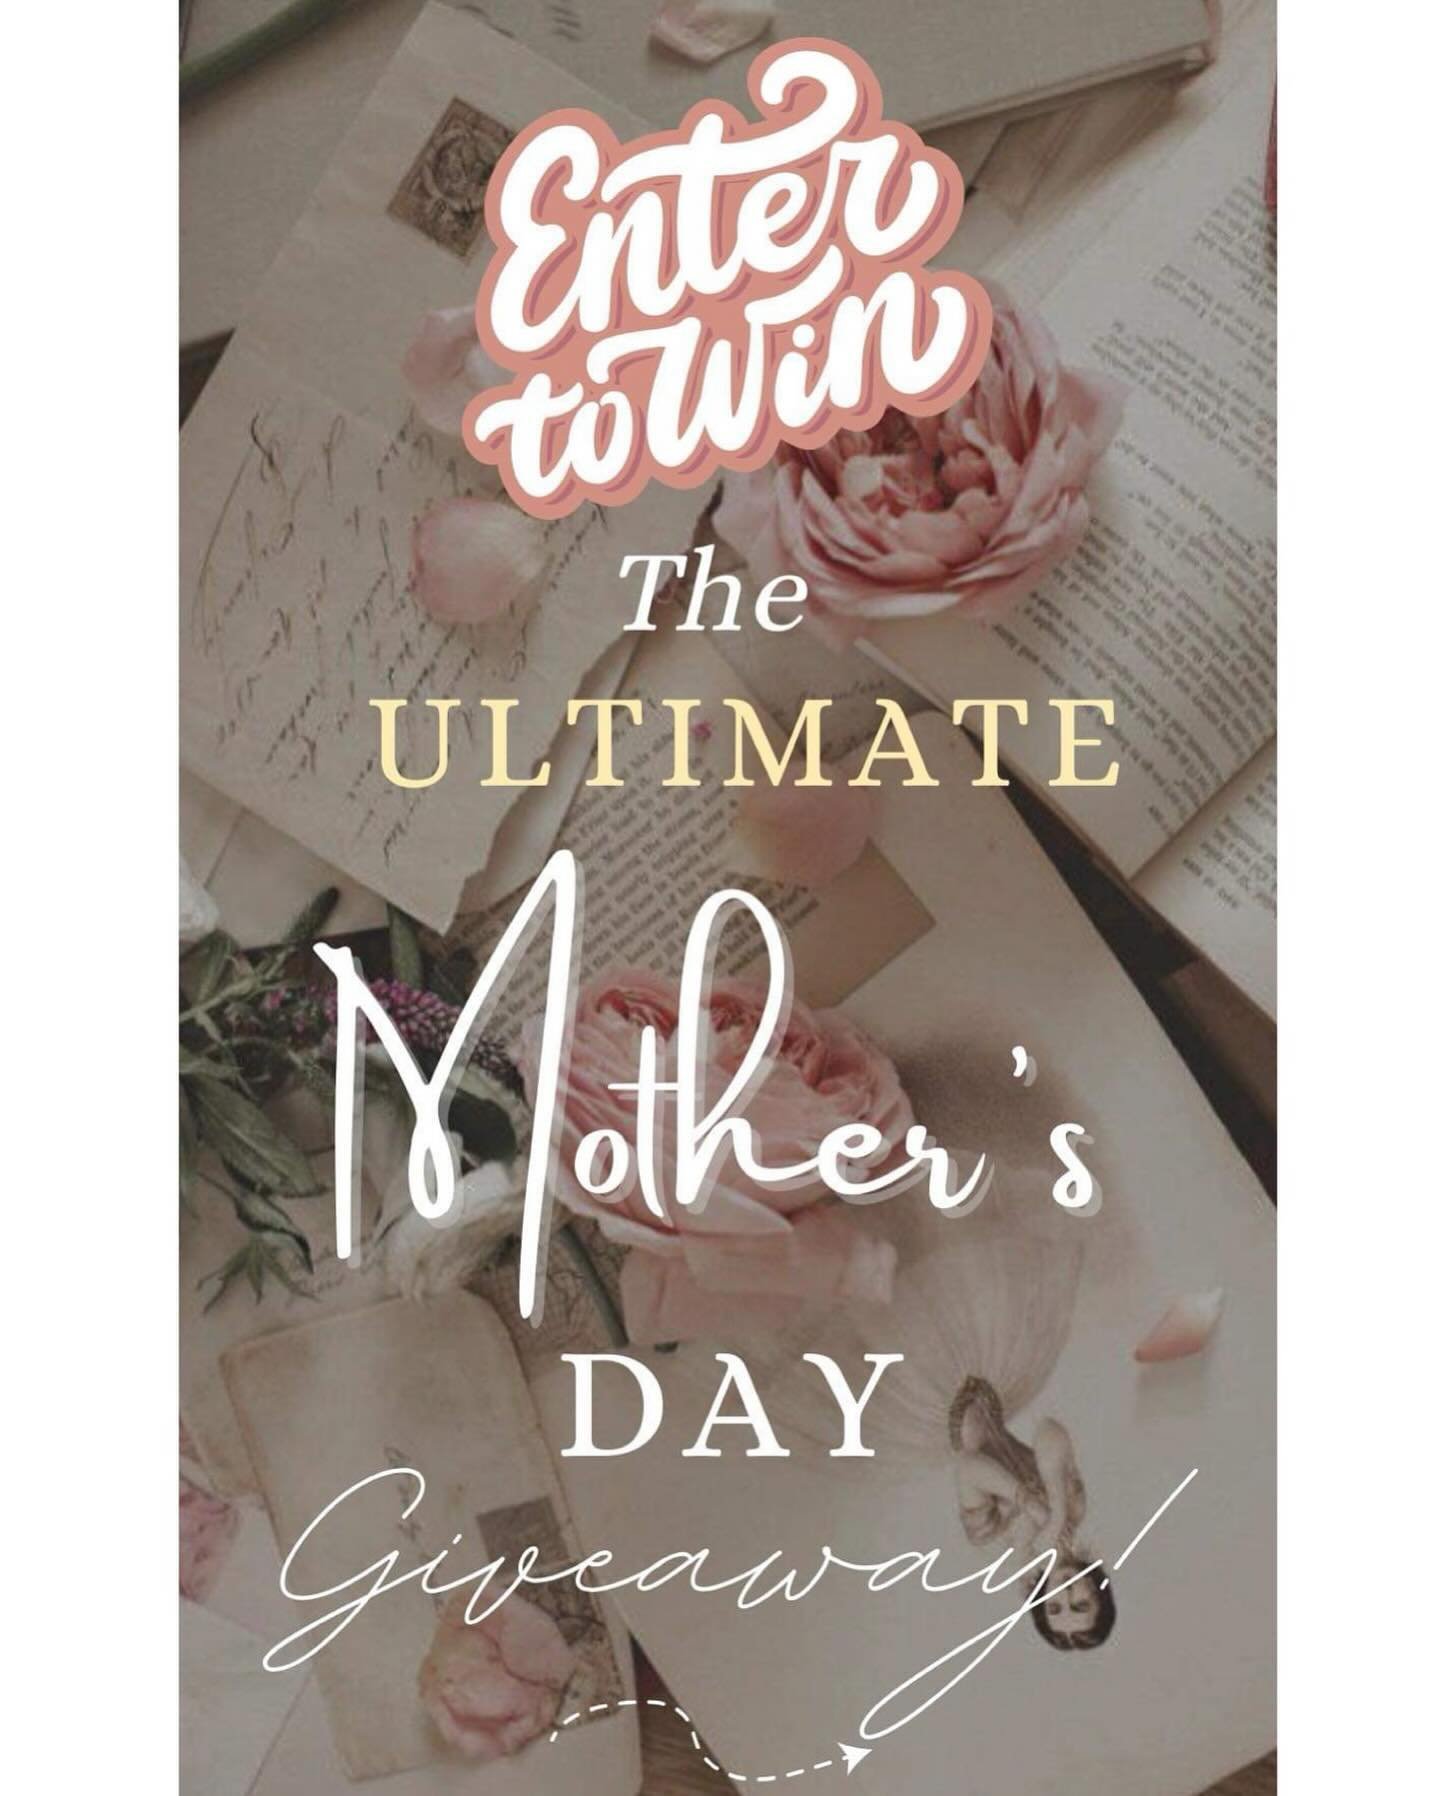 🎉🎊TIME FOR A CONTEST!! 

We&rsquo;ve created the ULTIMATE Mother&rsquo;s Day Giveaway package with a value of over $850!!!😱 

To enter the contest all you have to do is buy a gift card/certificate, or book an appointment/purchase products from any